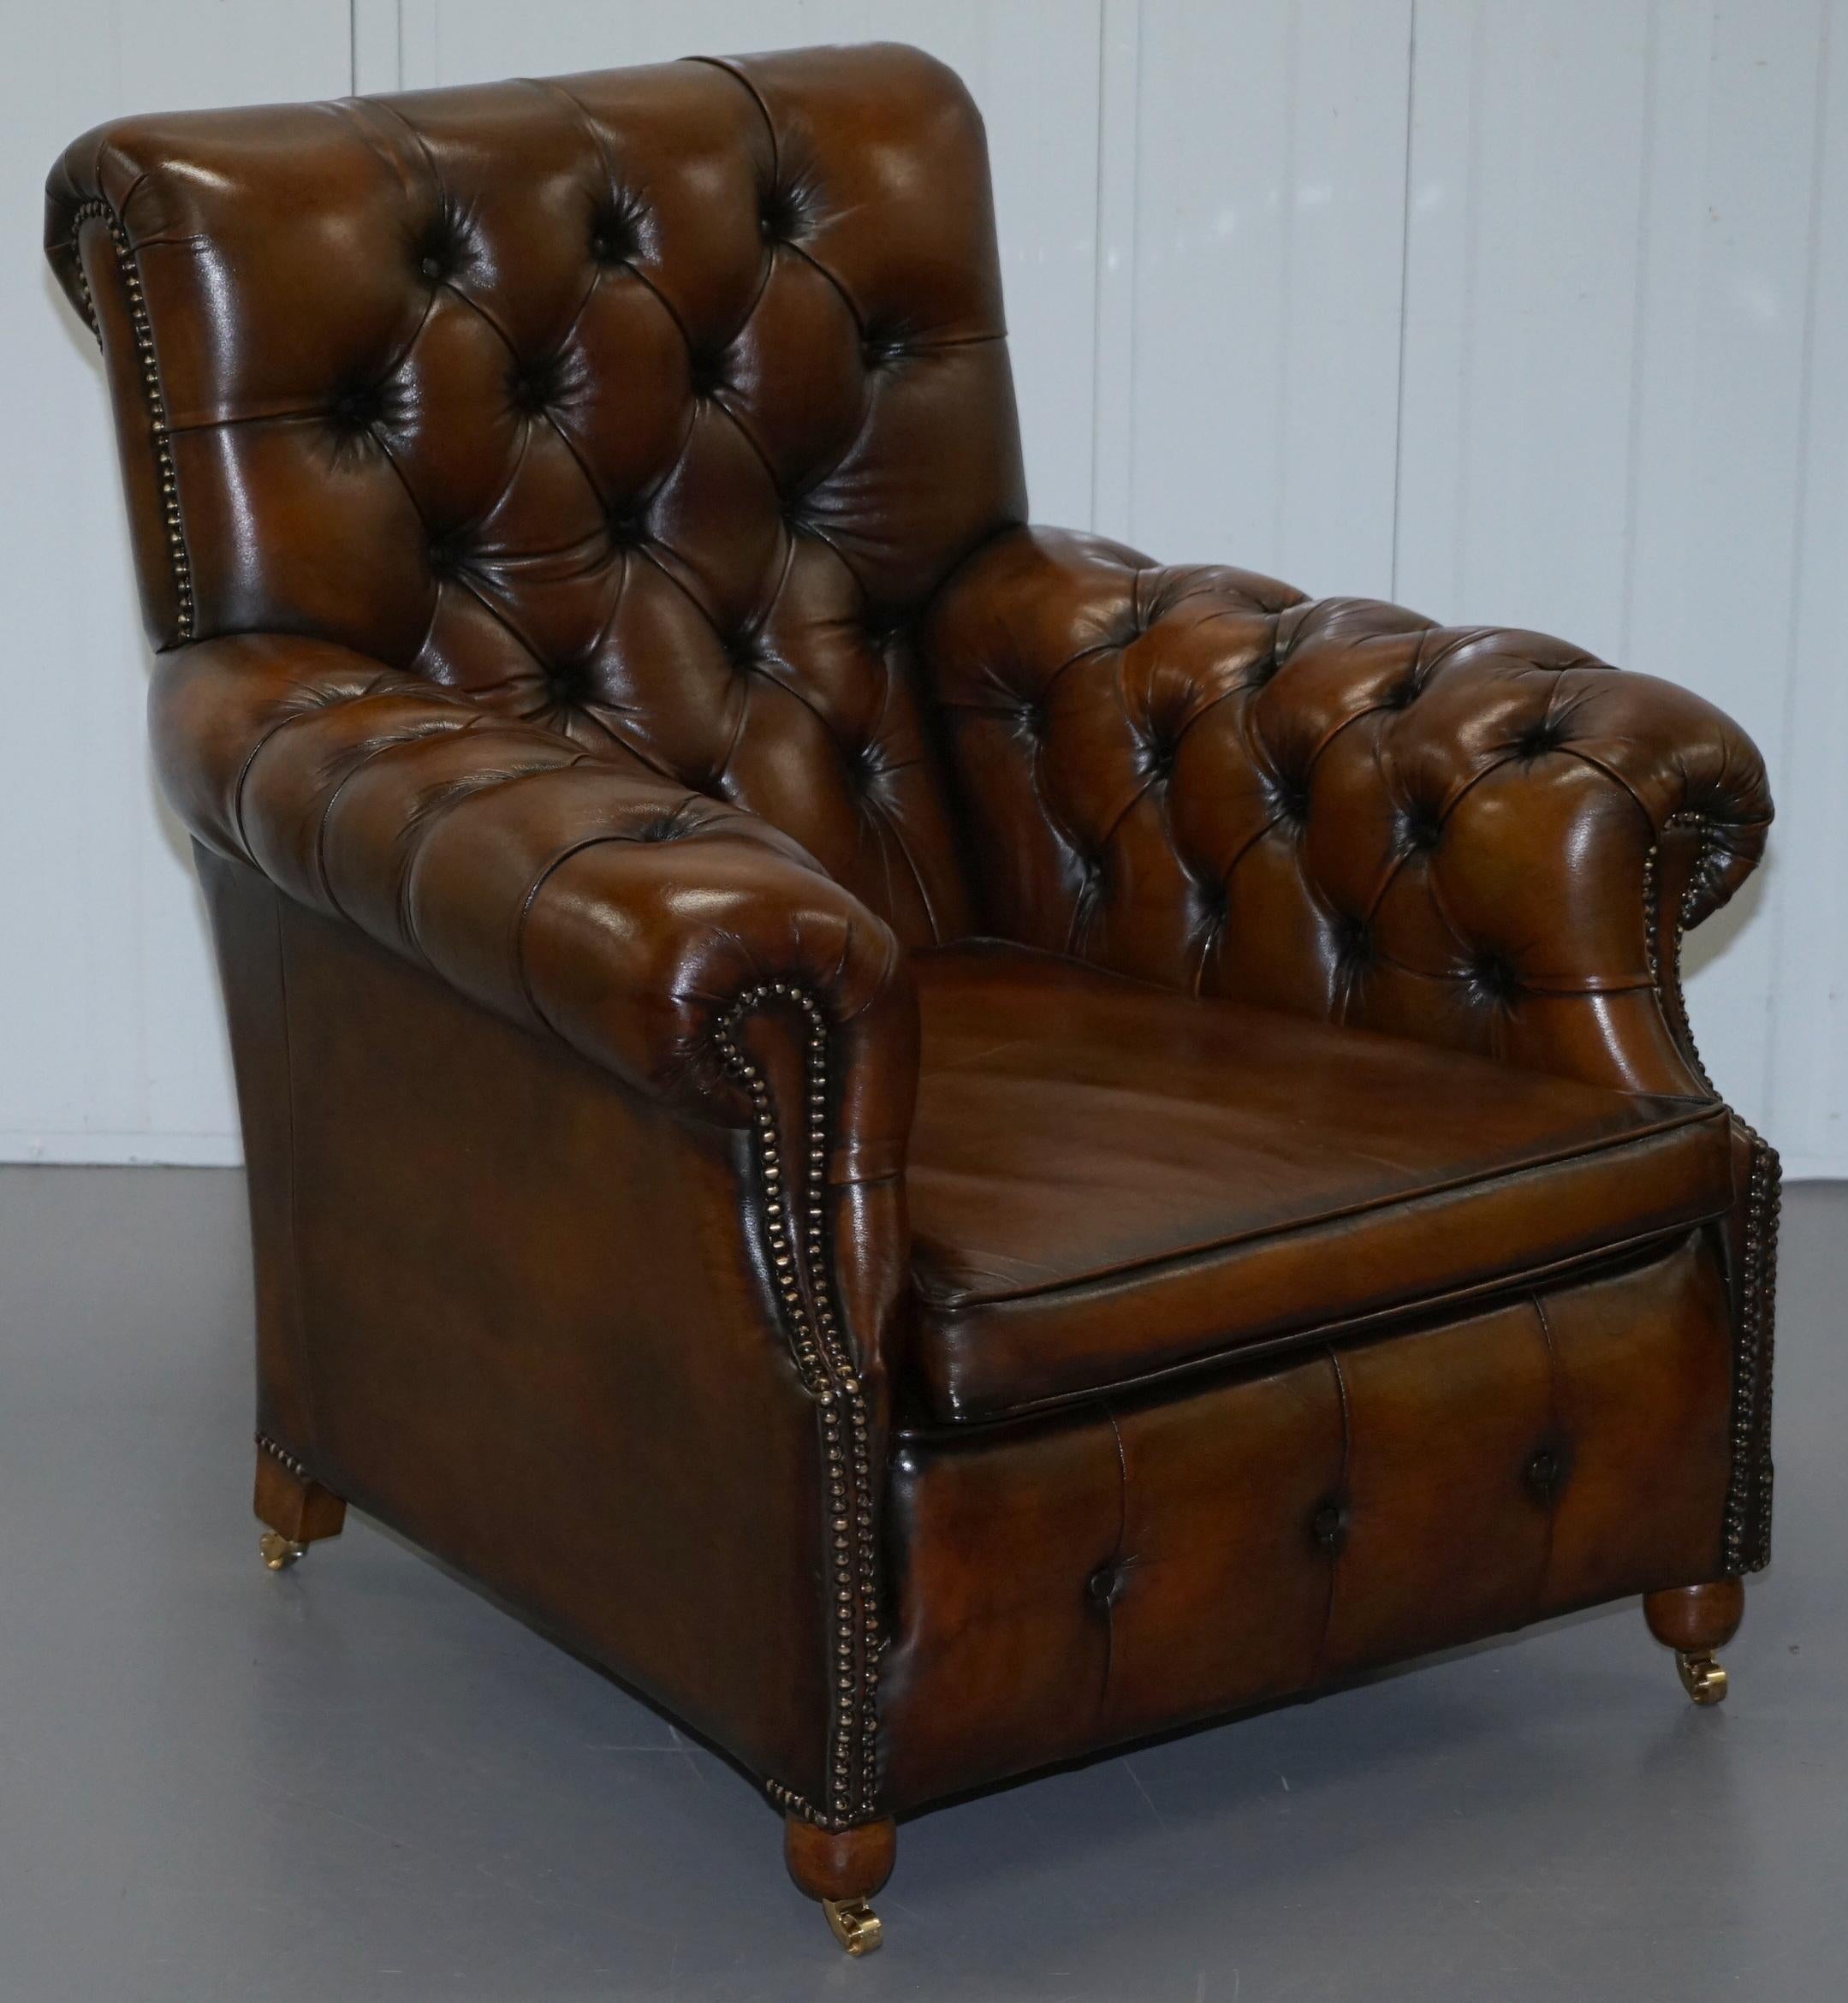 English Restored Victorian Brown Leather Chesterfield Club Armchair Drop Arm Sofa Suite